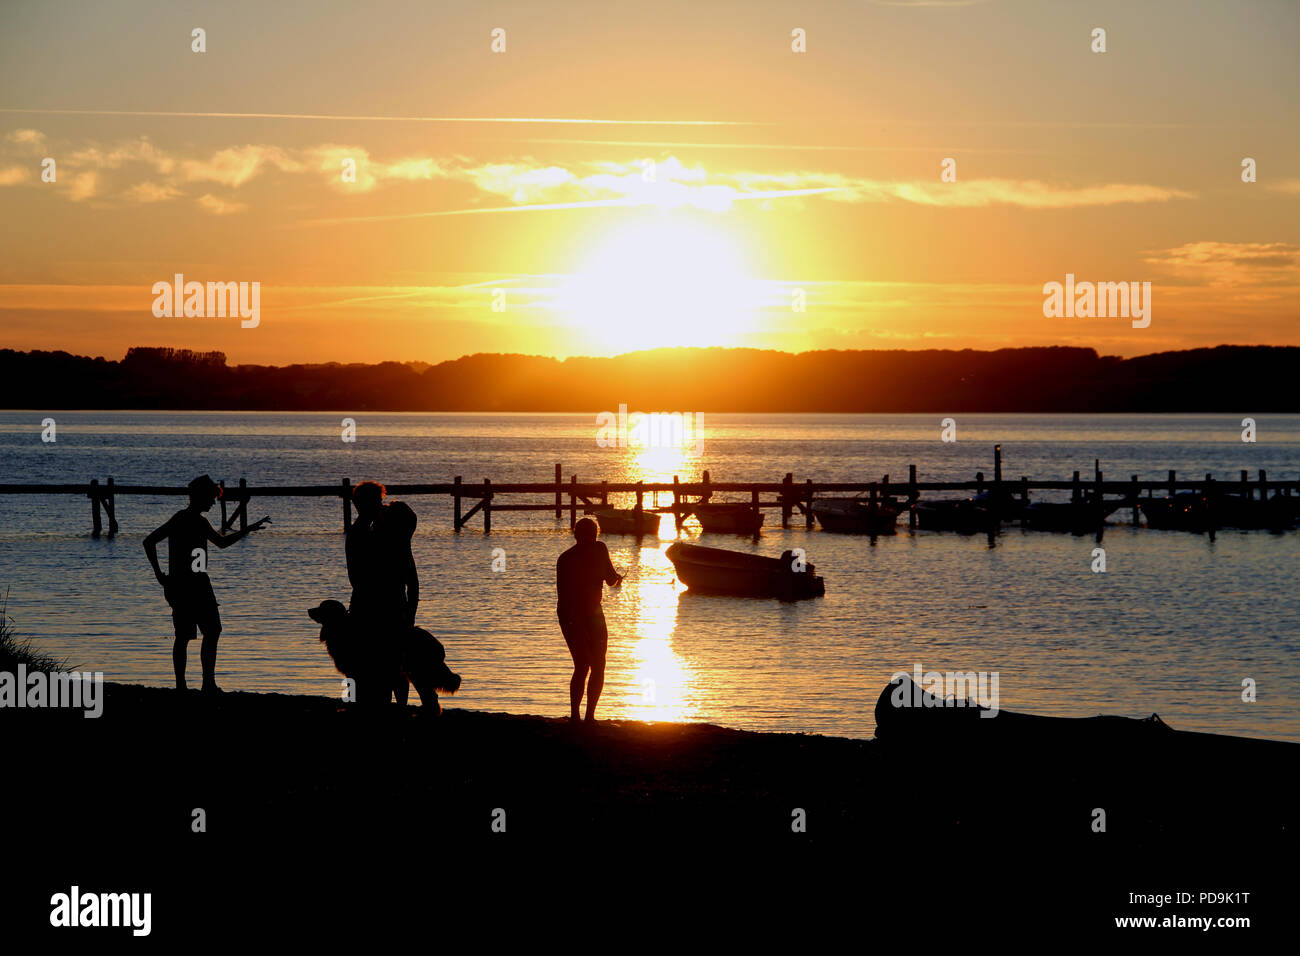 People enjoying the cooler evening at a beach in Southern Denmark Stock Photo